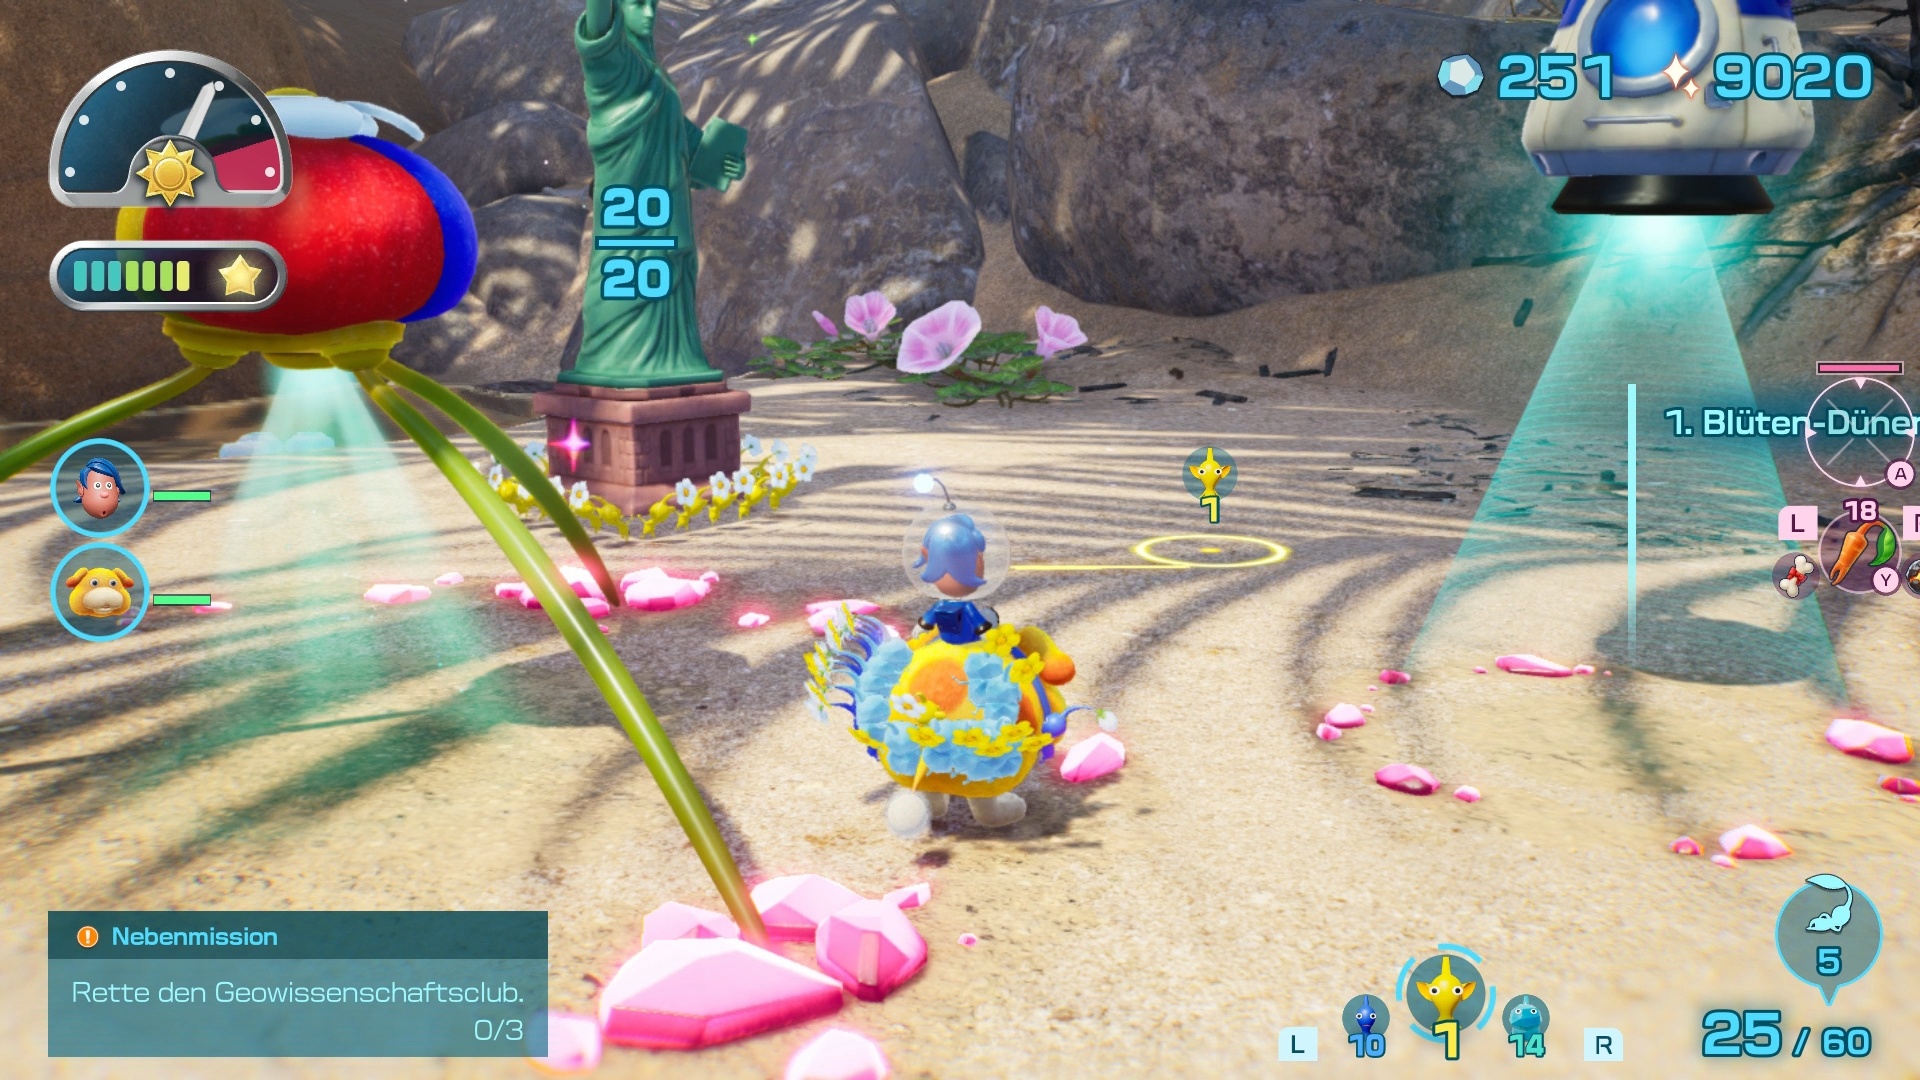 (Outpost on the beach: Our Pikmin are hauling a Statue of Liberty treasure to the Beagle (right) for recycling. On the left is our (troop carrier) Onion, we can change Pikmin types here).